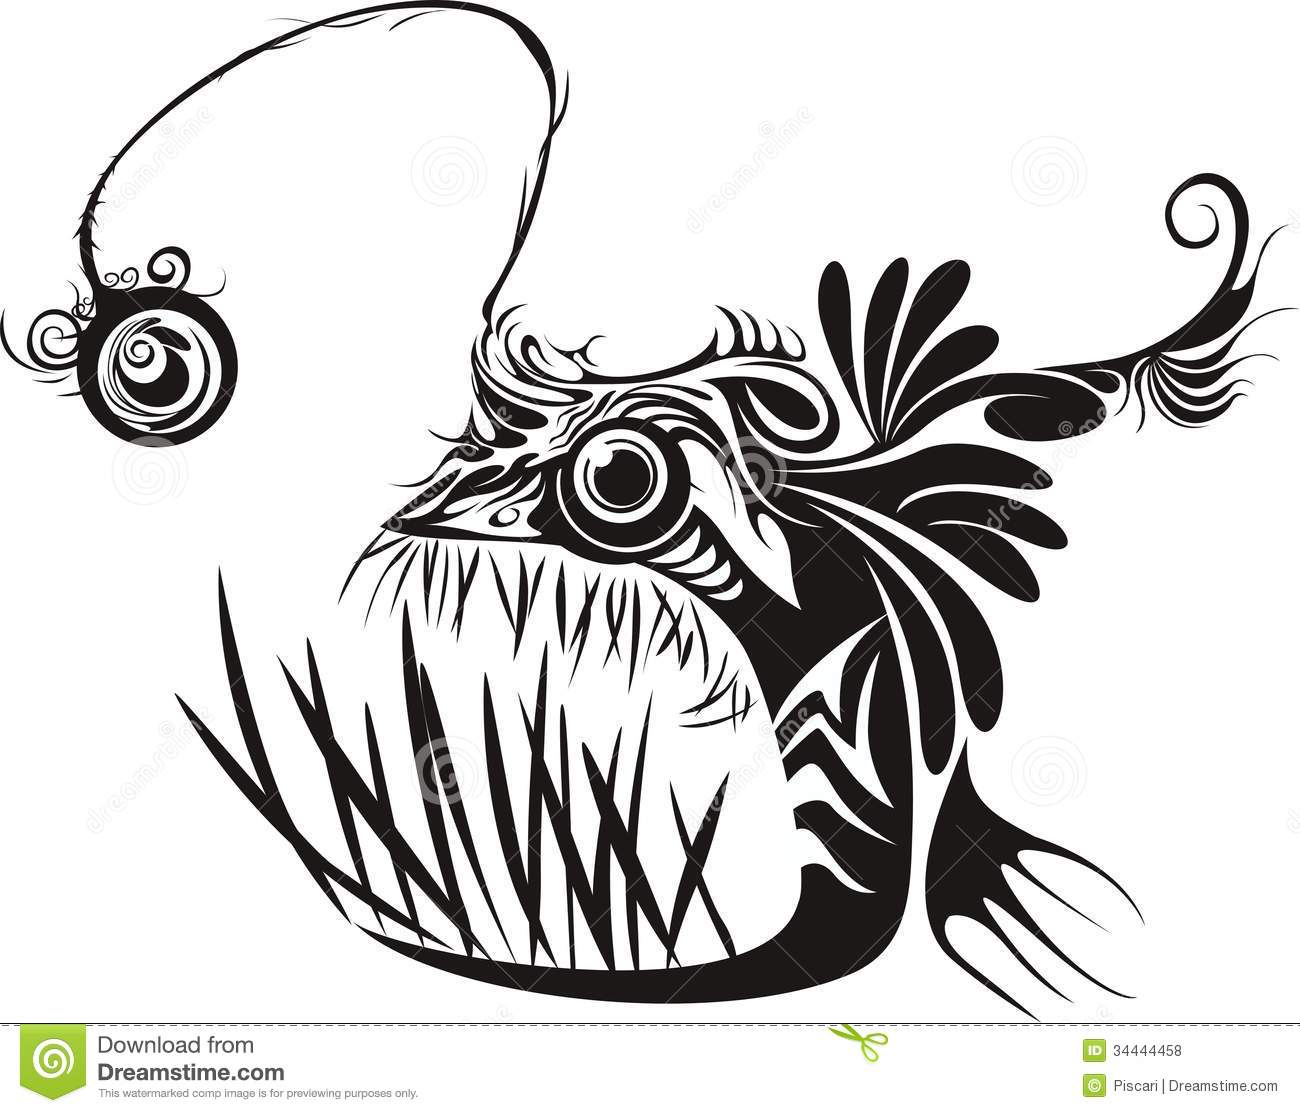 Scary Black And White Angler Fish Tattoo Design